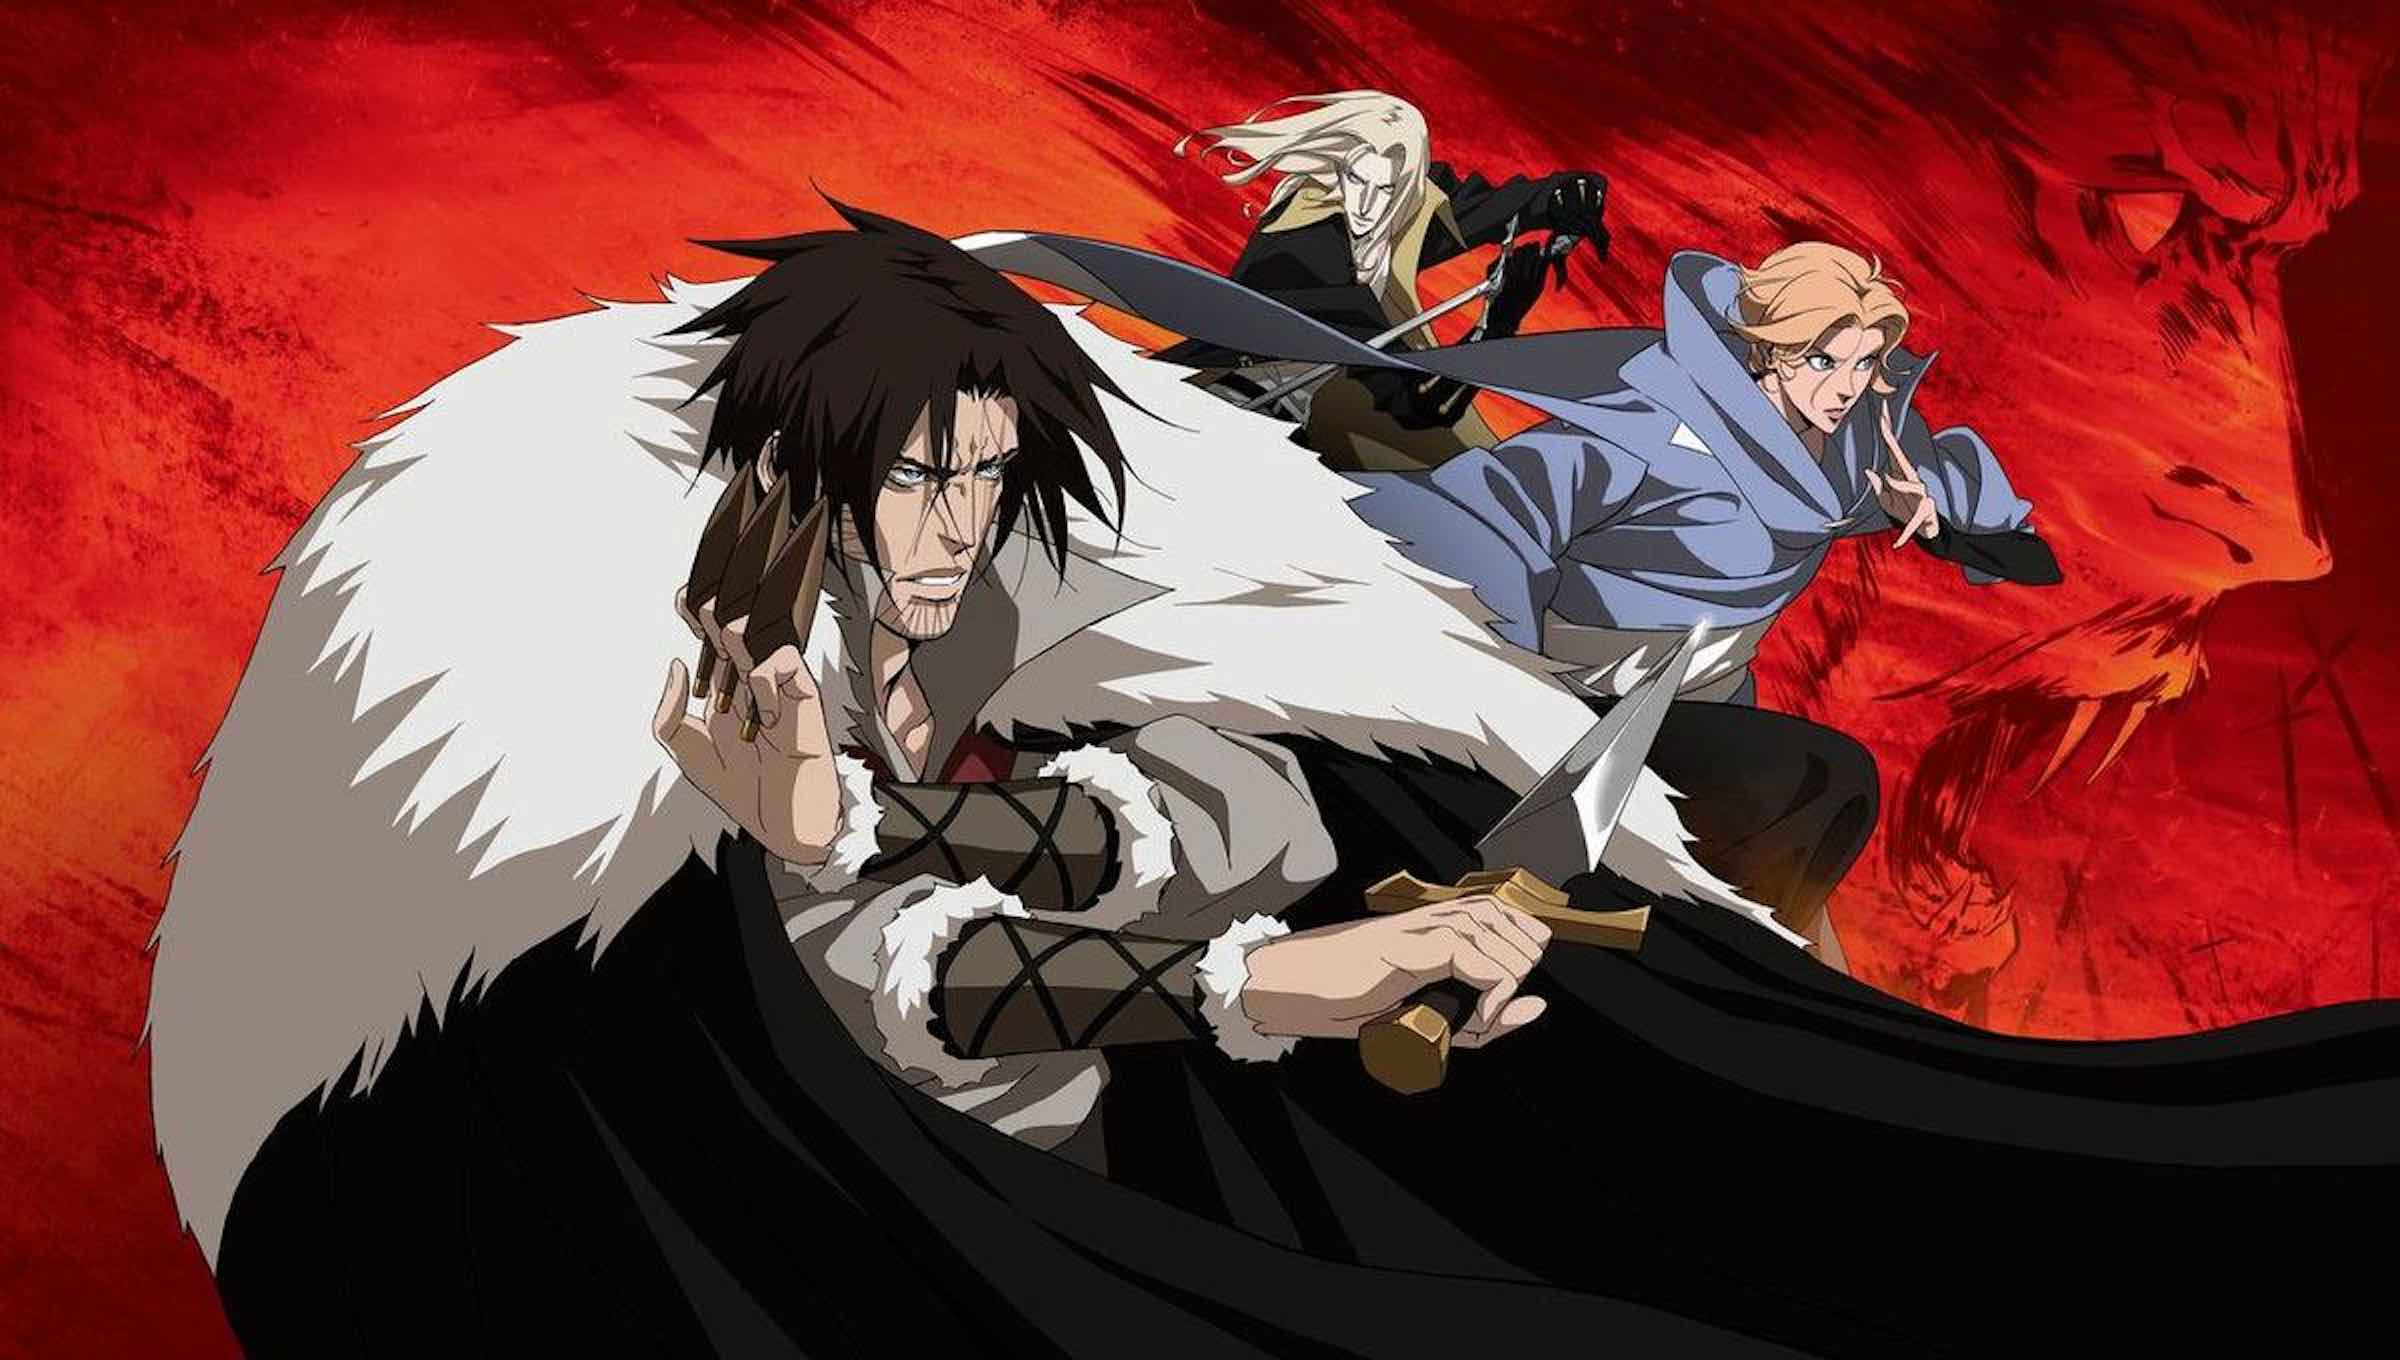 Here Are The Vampire Anime Currently On Netflix - We Got This Covered